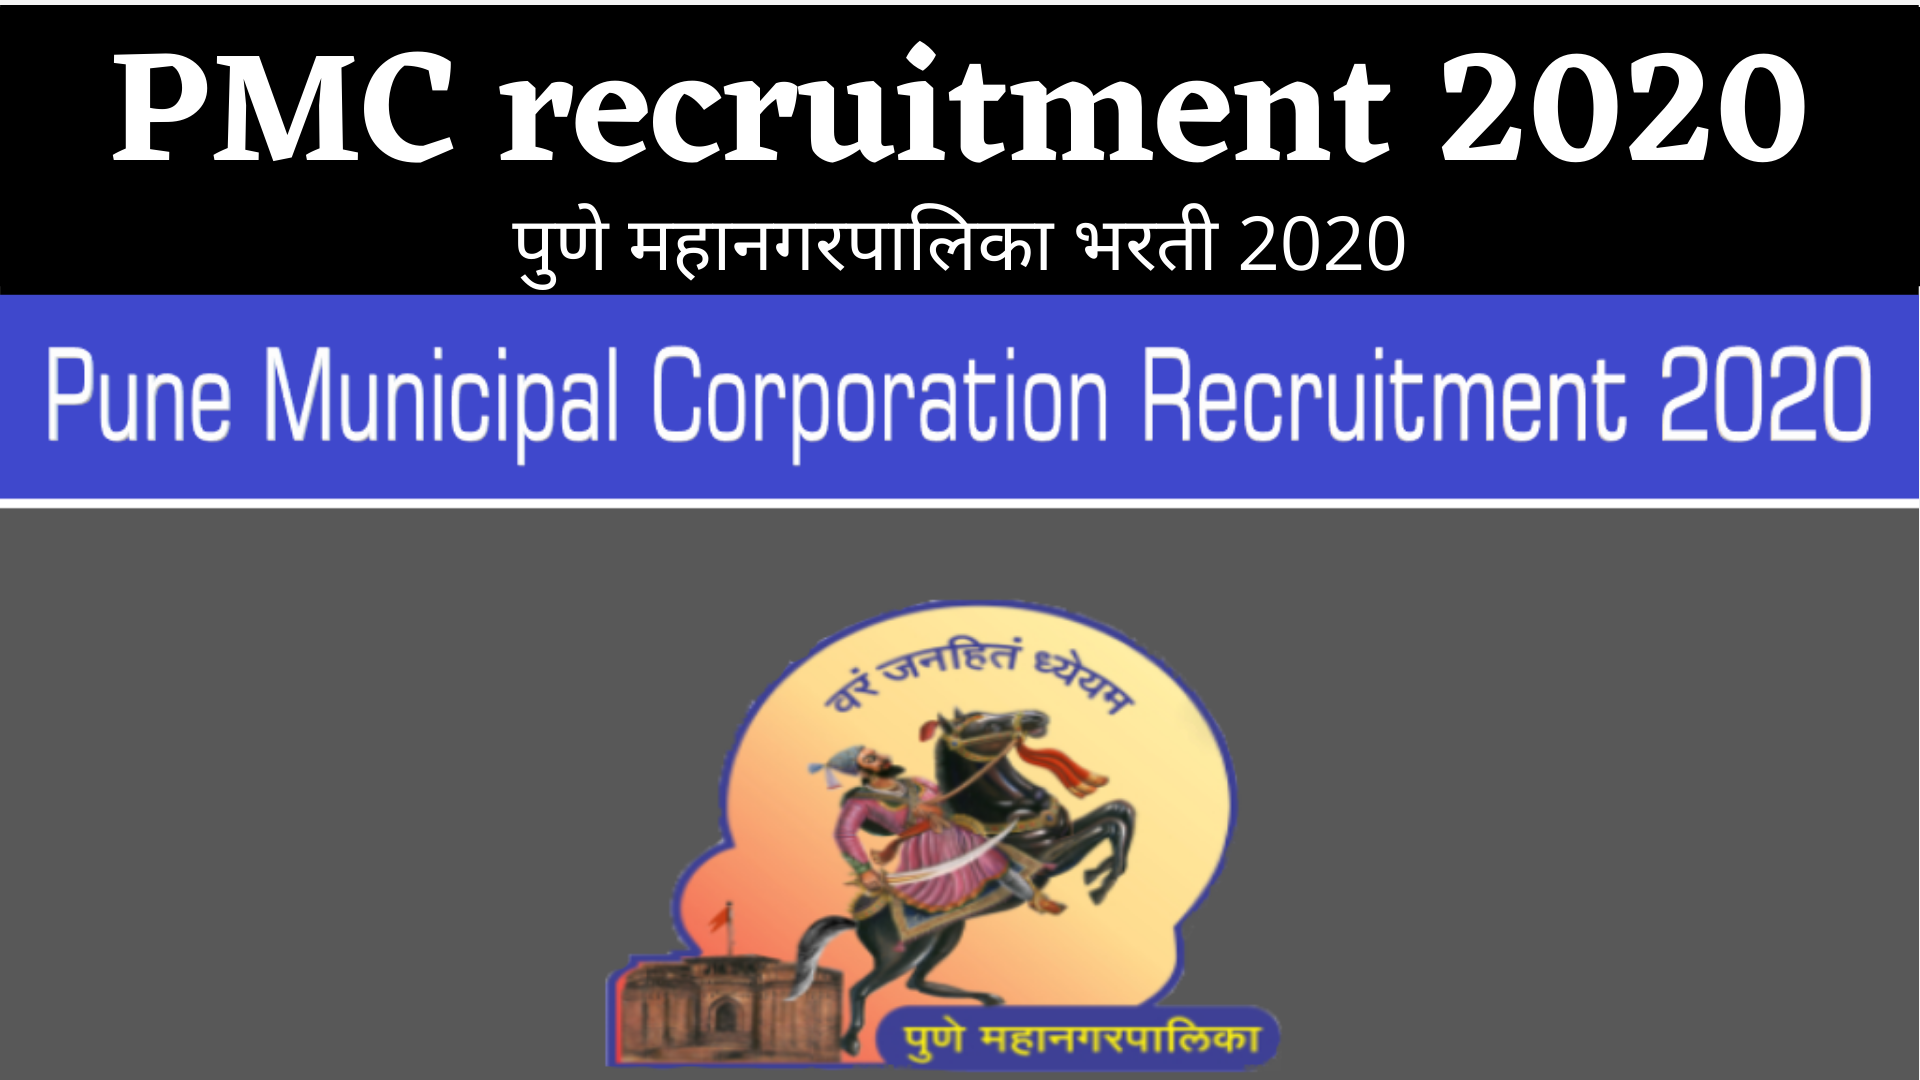 PMC Recruitment 2020 | pmc gov in recruitment www pmc gov in recruitment 2019 pmc recruitment 2019 application form www pmc gov in job pmc recruitment 2018 19 pmc recruitment 2019 for engineers pune municipal corporation recruitment 2019 for clerk pune municipal corporation recruitment 2020